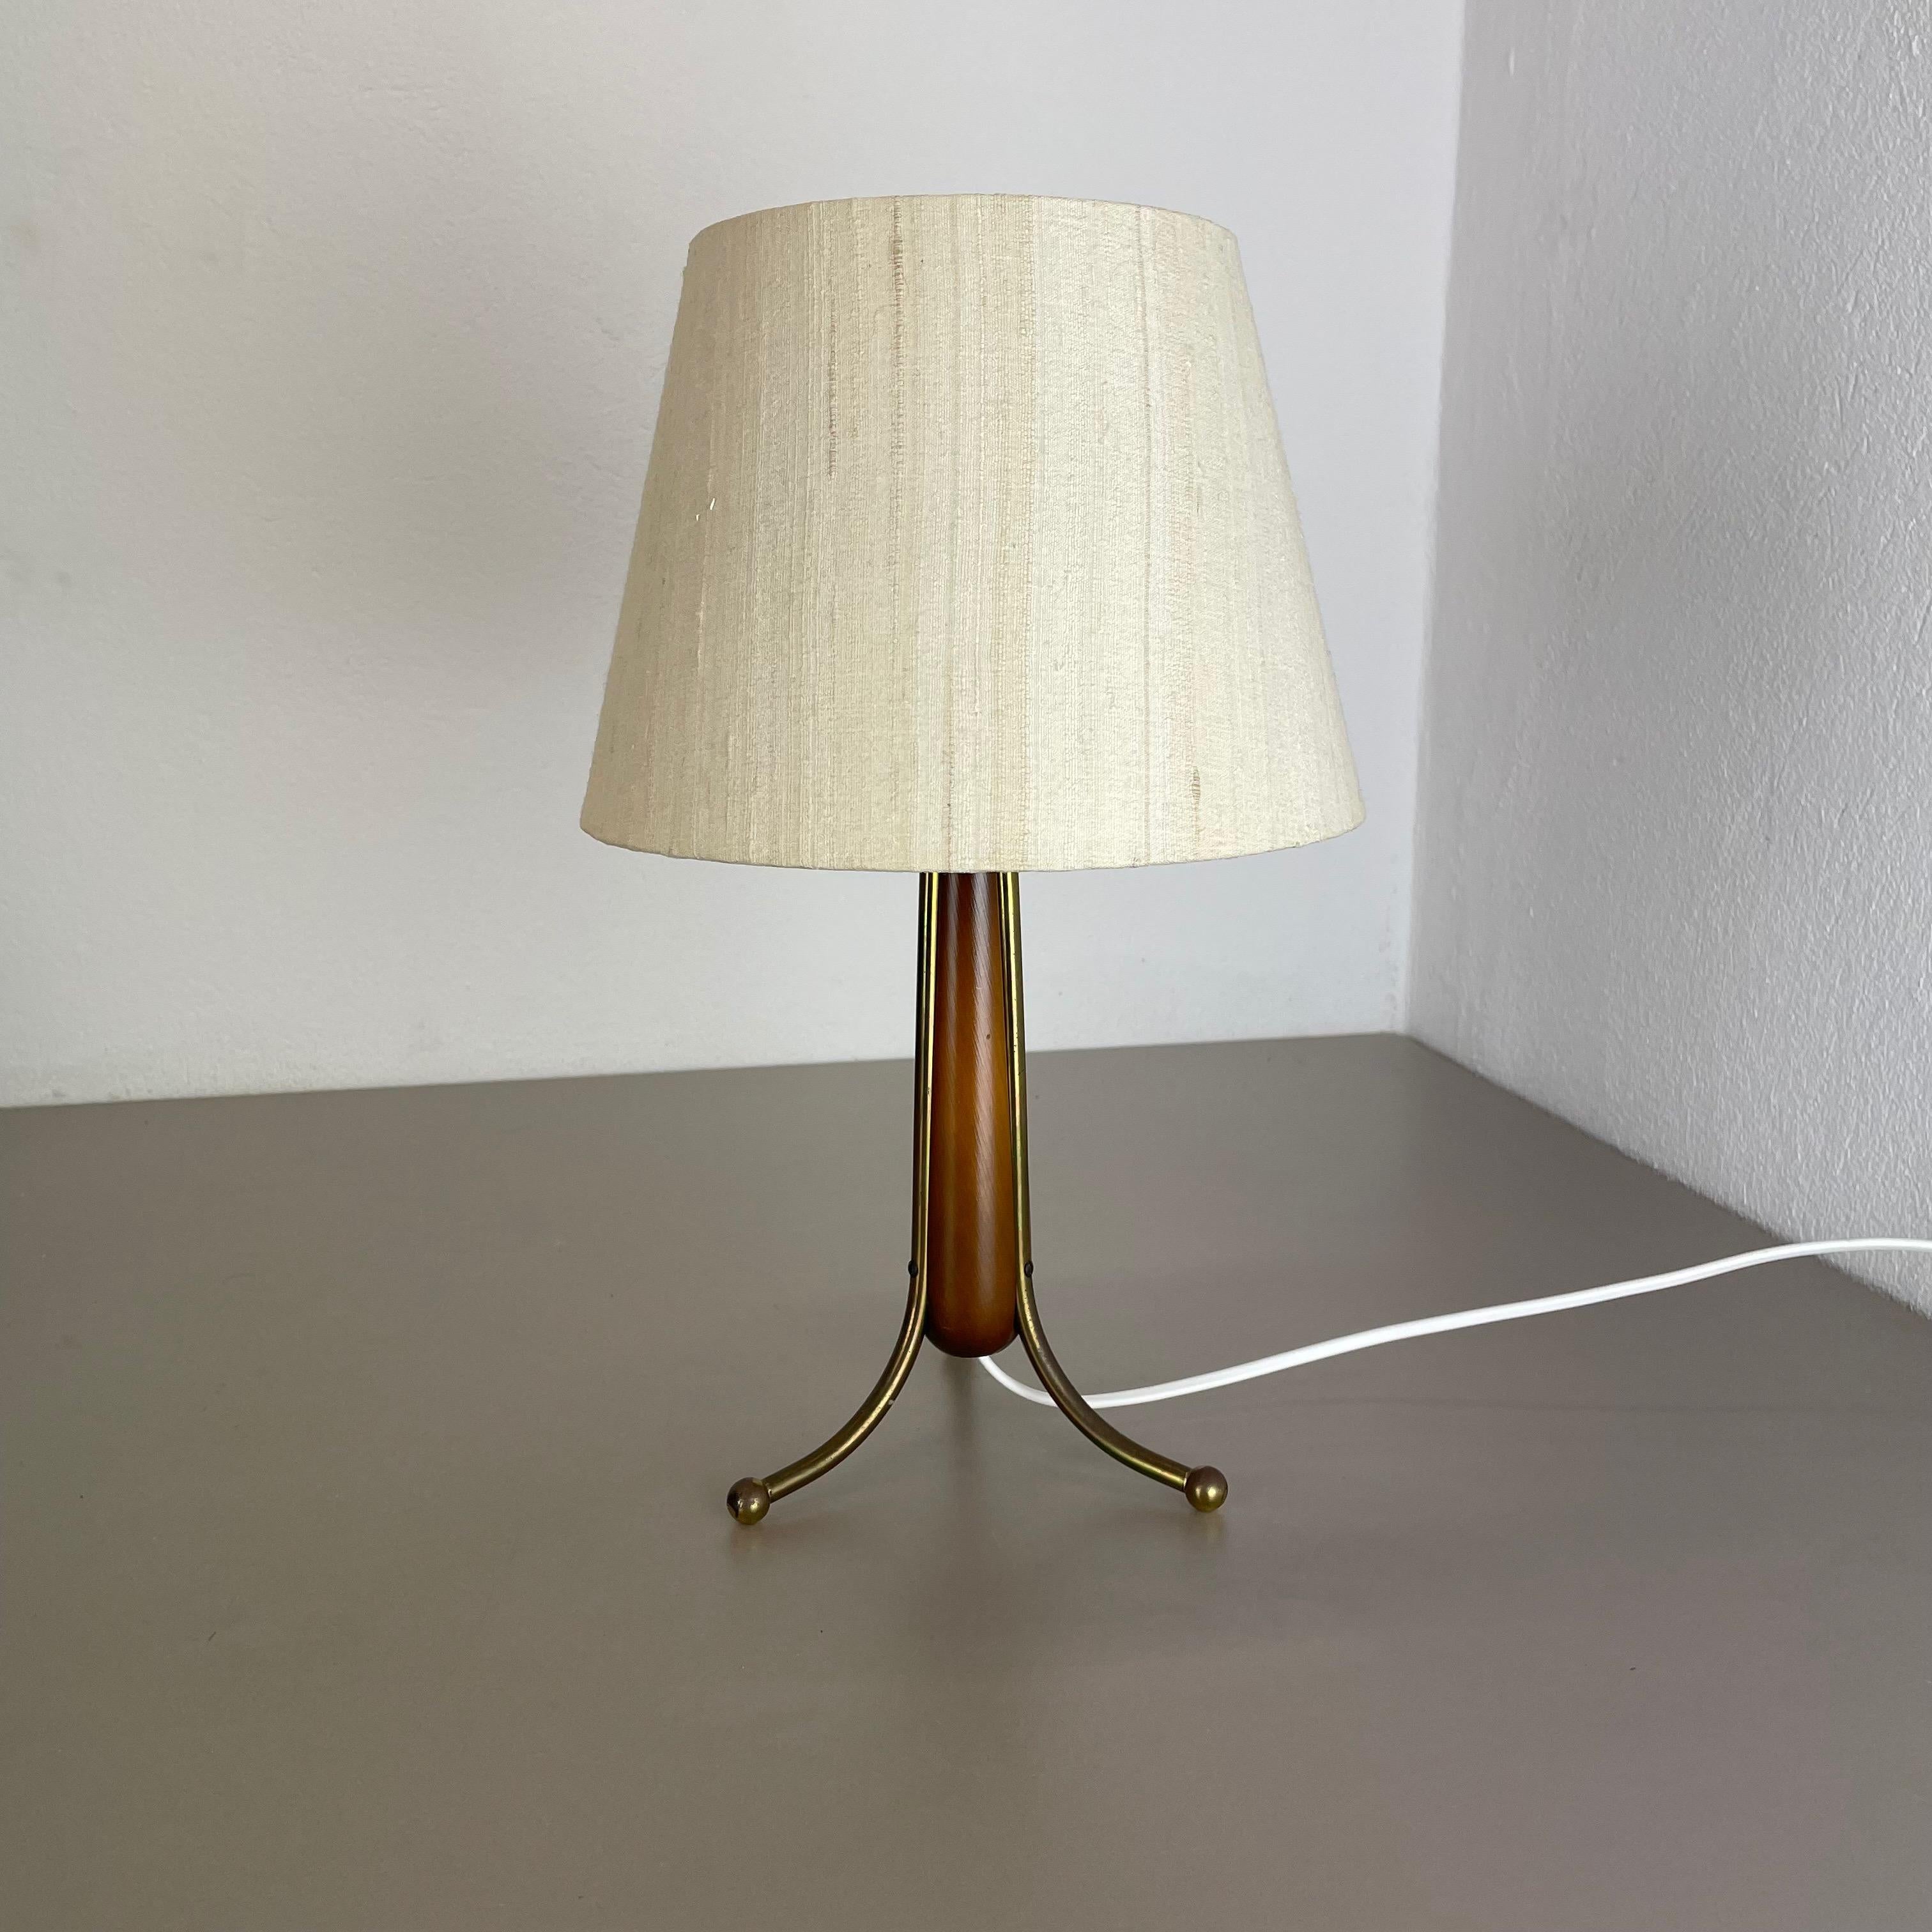 Article:

tripod table light


Origin:

Austria


Age:

1960s


This original vintage tripod table light was designed and produced in the 1960s in Austria. the super rare and Minimalist tripod Stand element is made of wood and 3 brass